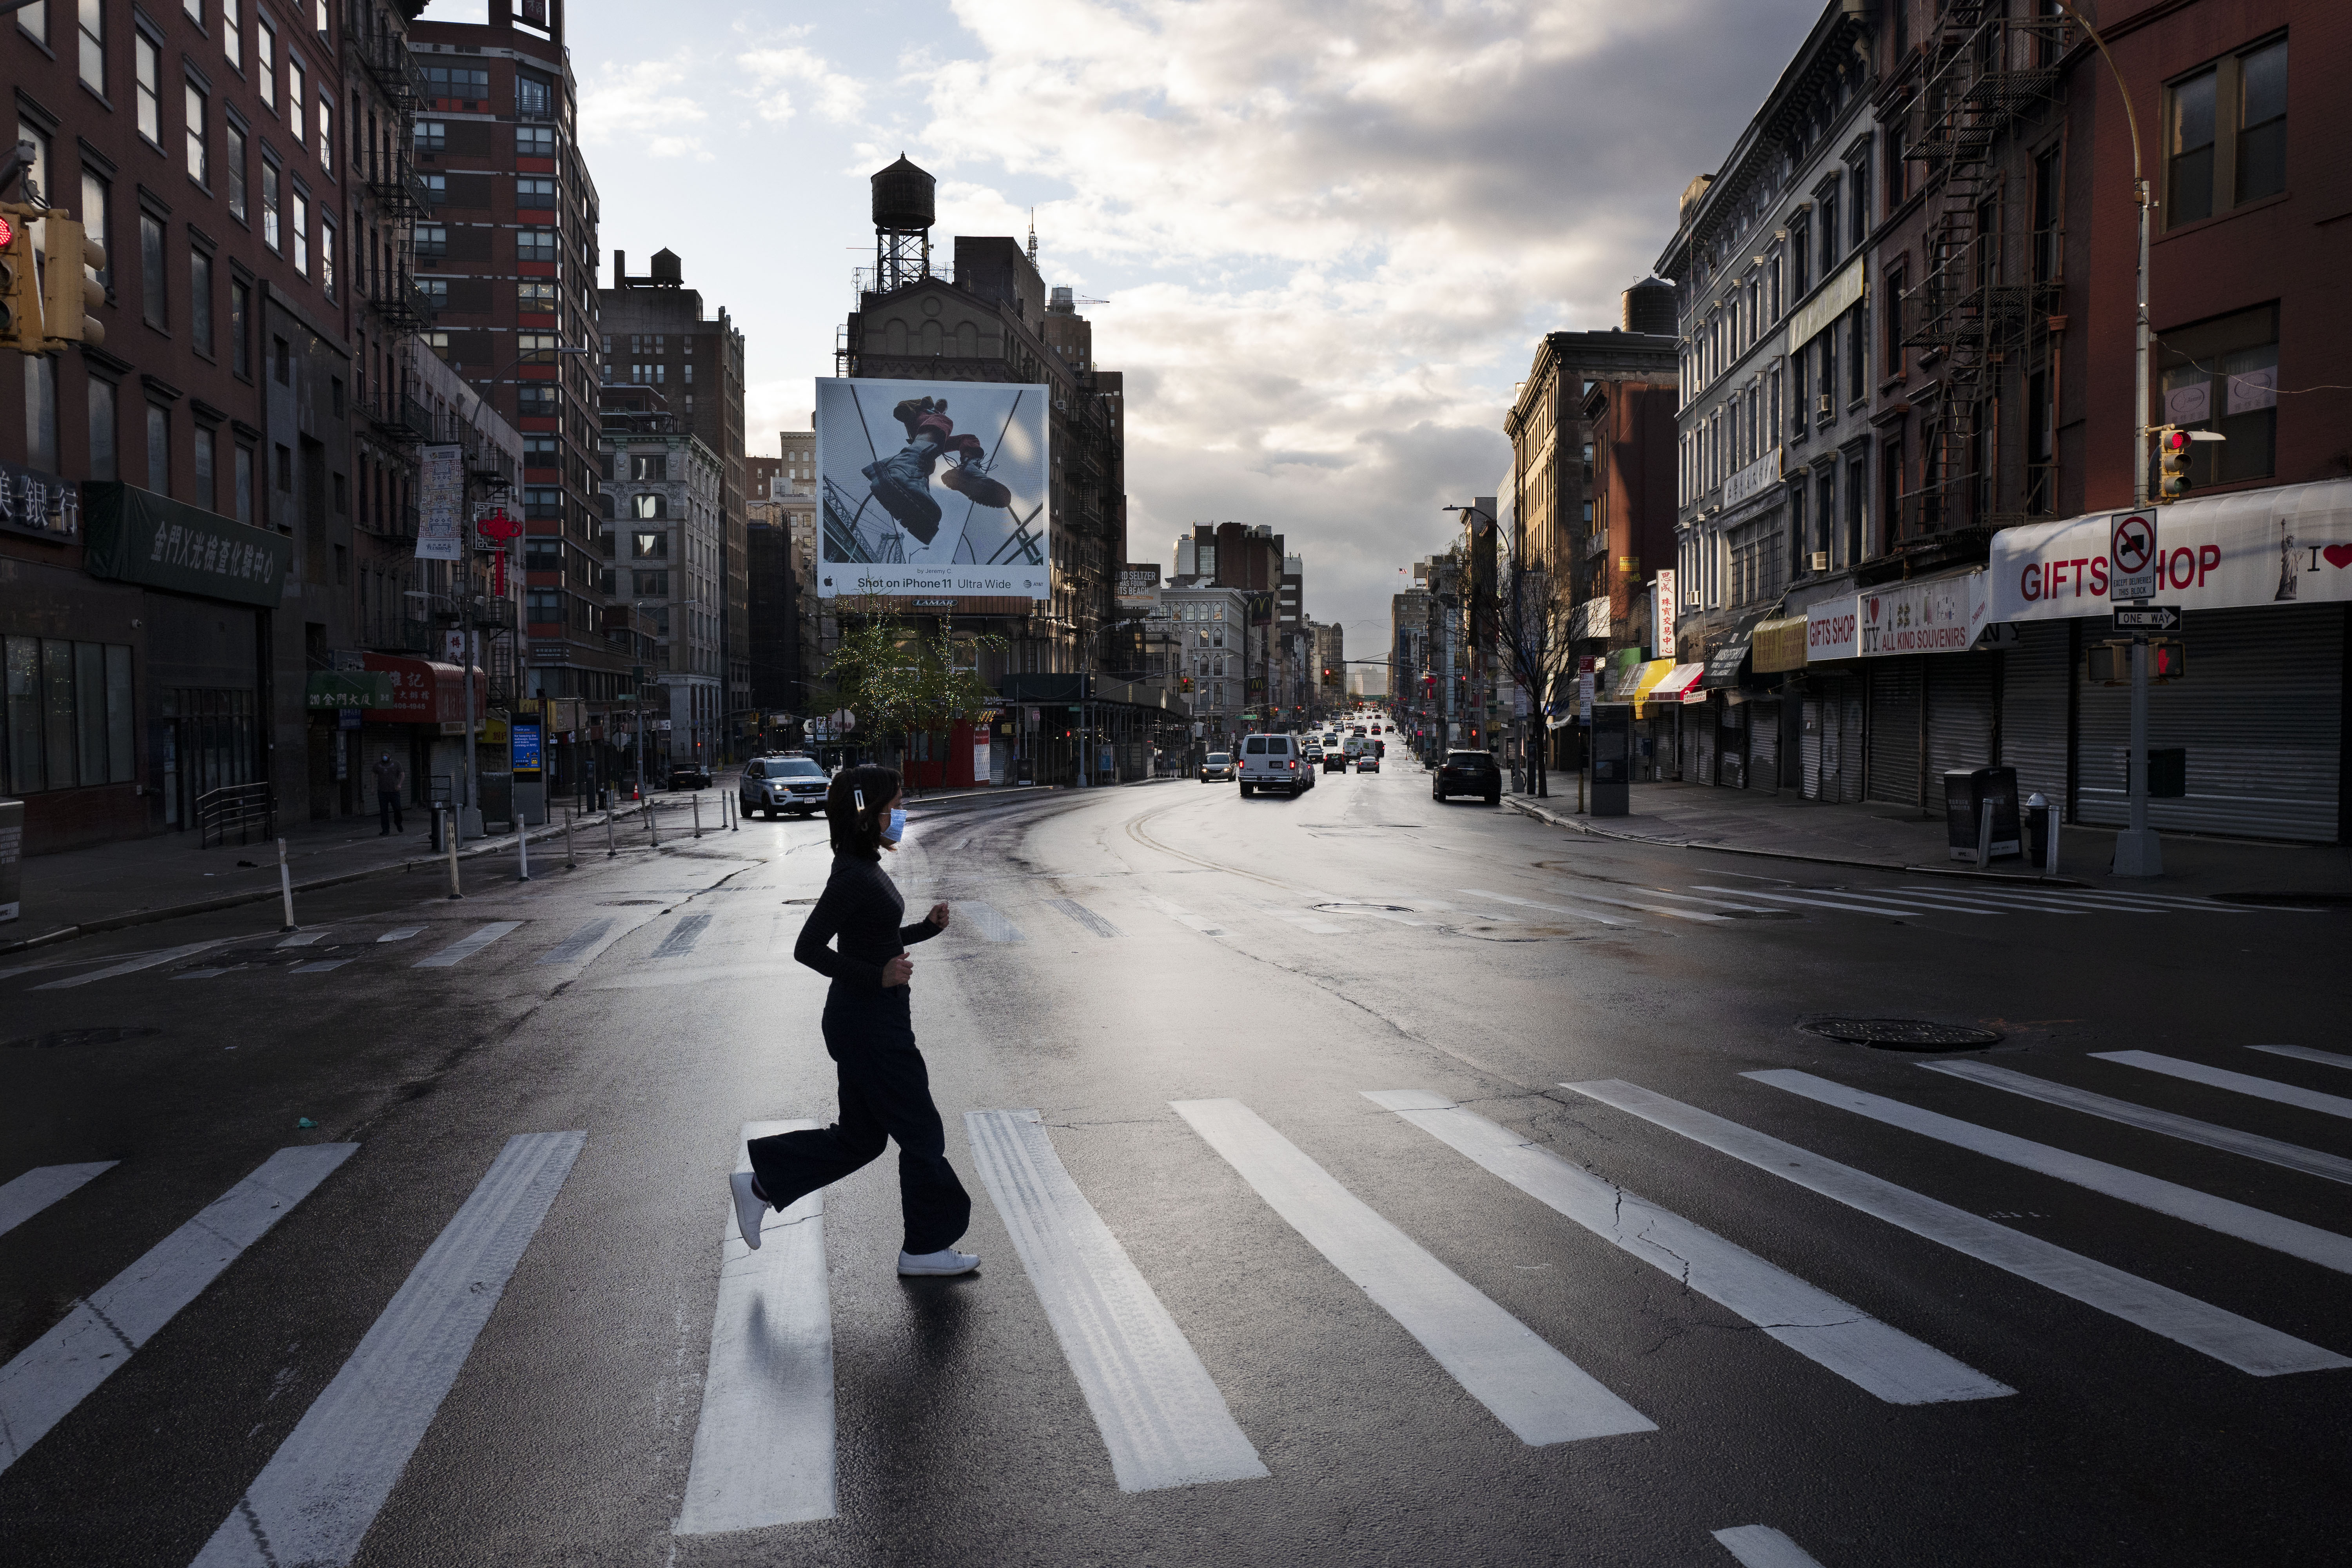 A woman wearing a mask jogs across a quiet section of Canal Street during the coronavirus pandemic Monday, April 13, 2020, in New York. Canal Street is normally packed with bumper-to-bumper traffic and pedestrians during the evening rush hour. (AP Photo/Mark Lennihan)